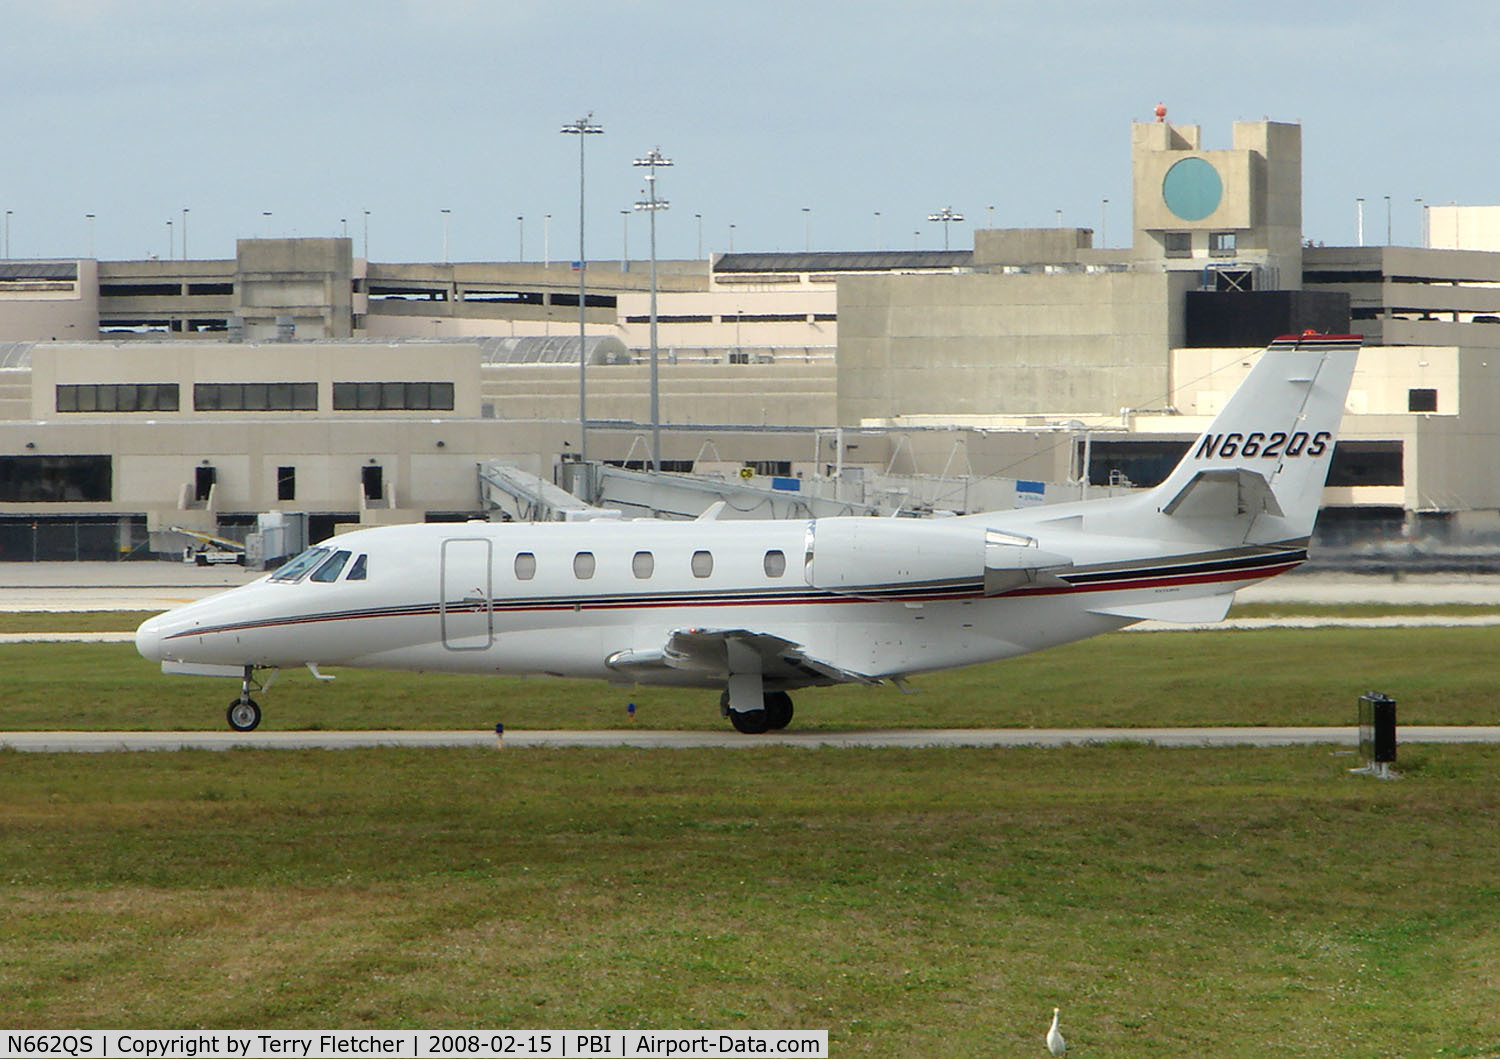 N662QS, 2002 Cessna 560XL C/N 5605262, The business aircraft traffic at West Palm Beach on the Friday before President's Day always provides the aviation enthusiast / photographer with a treat